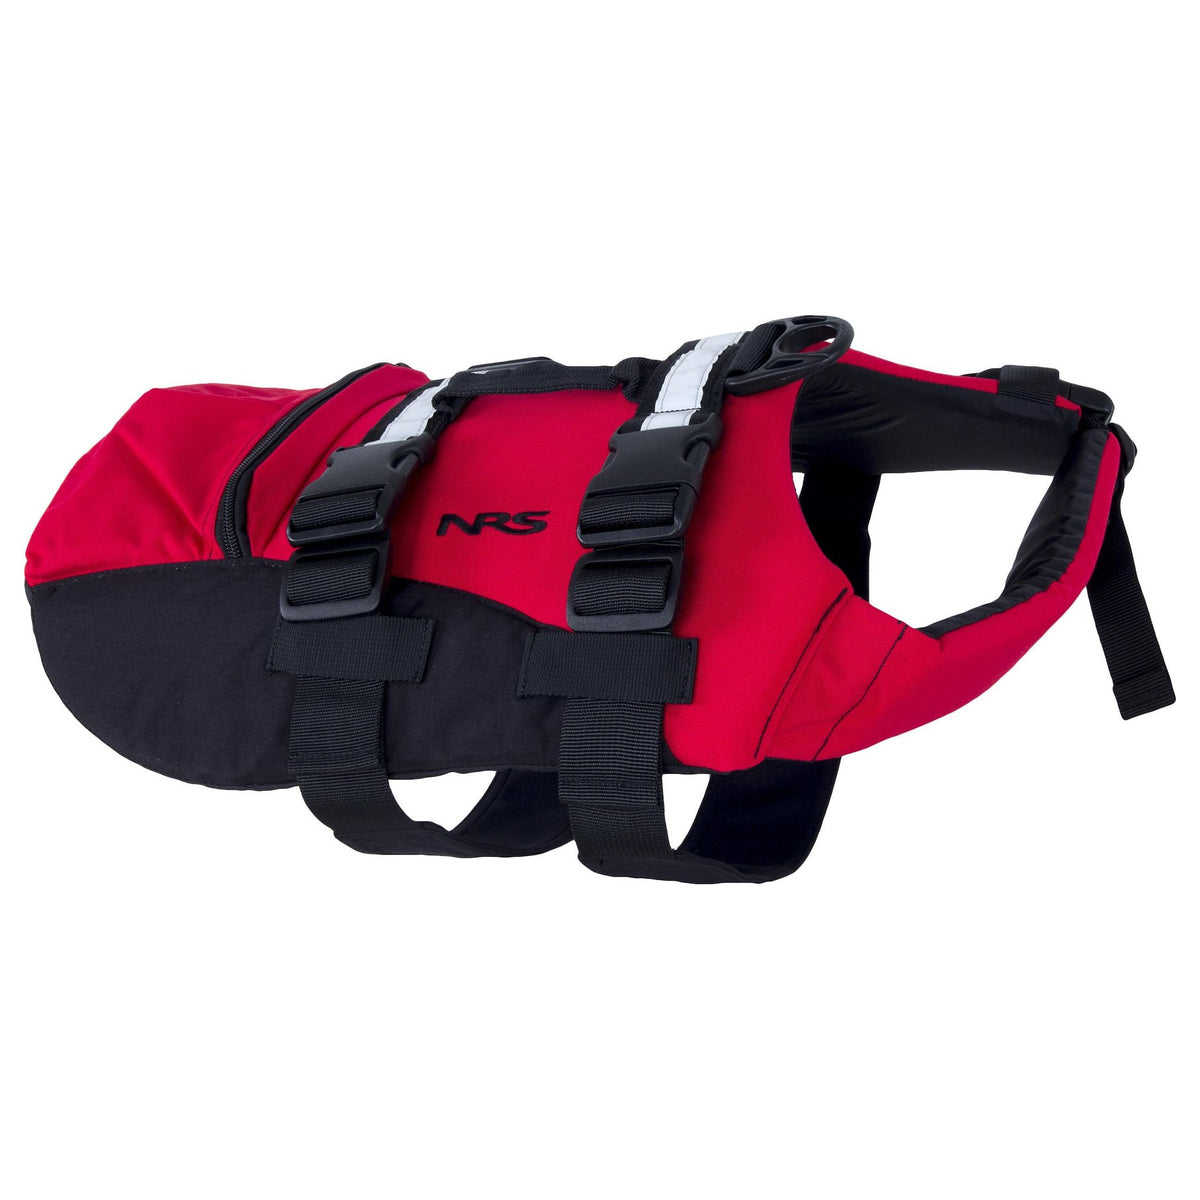 NRS Canine Flotation Device (CFD) (Discontinued)